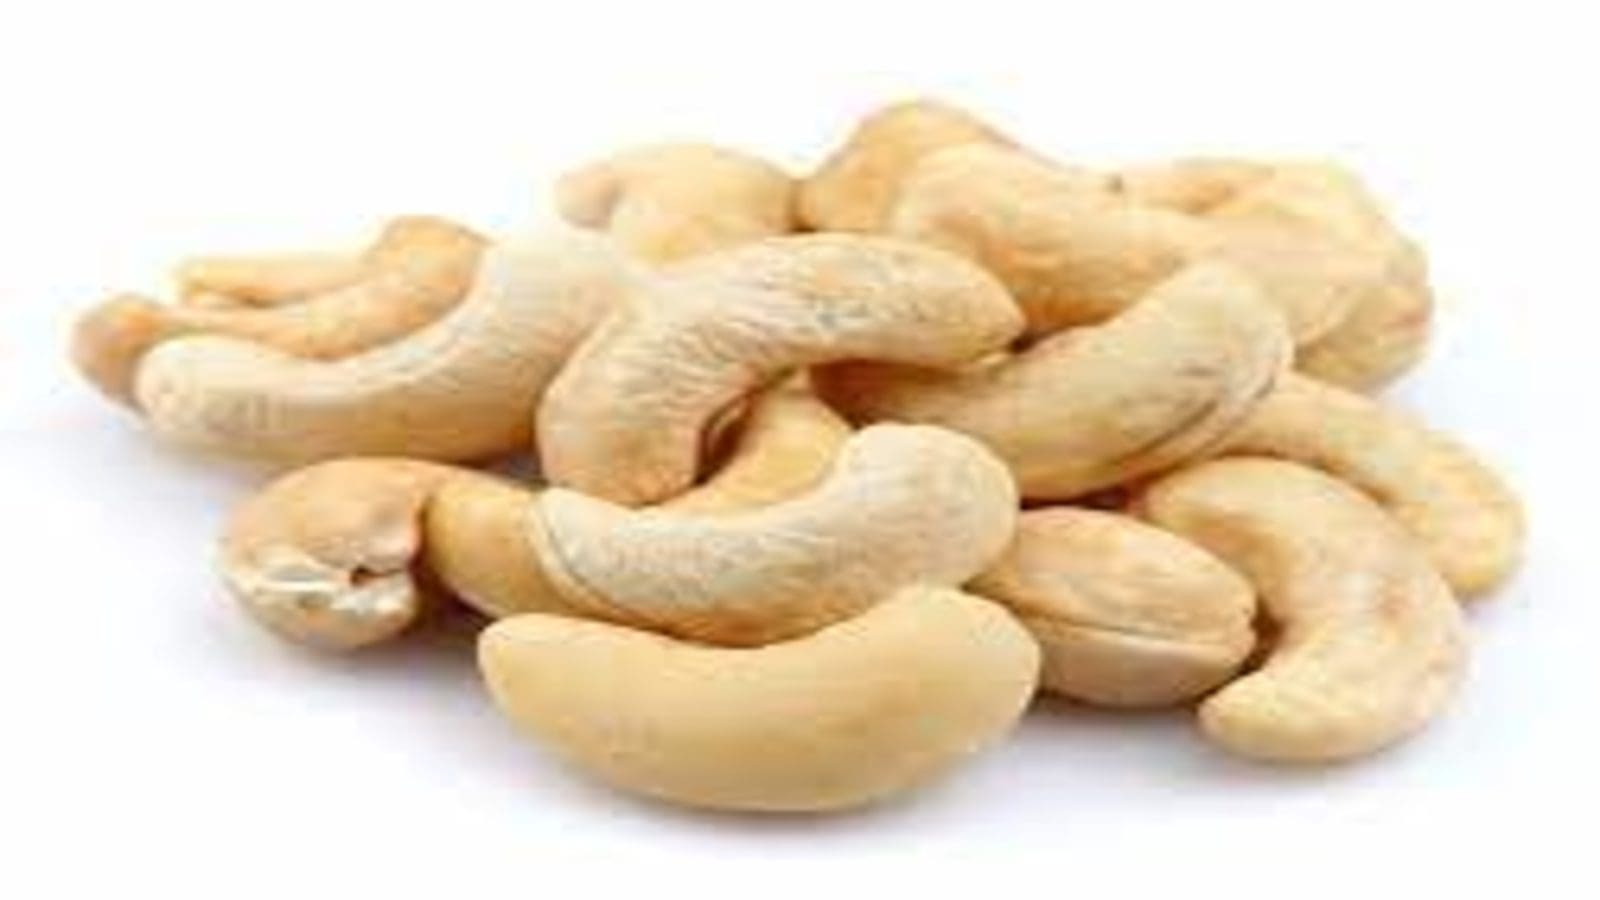 Nigeria to double revenues from cashew nut exports to US$500M in 2023